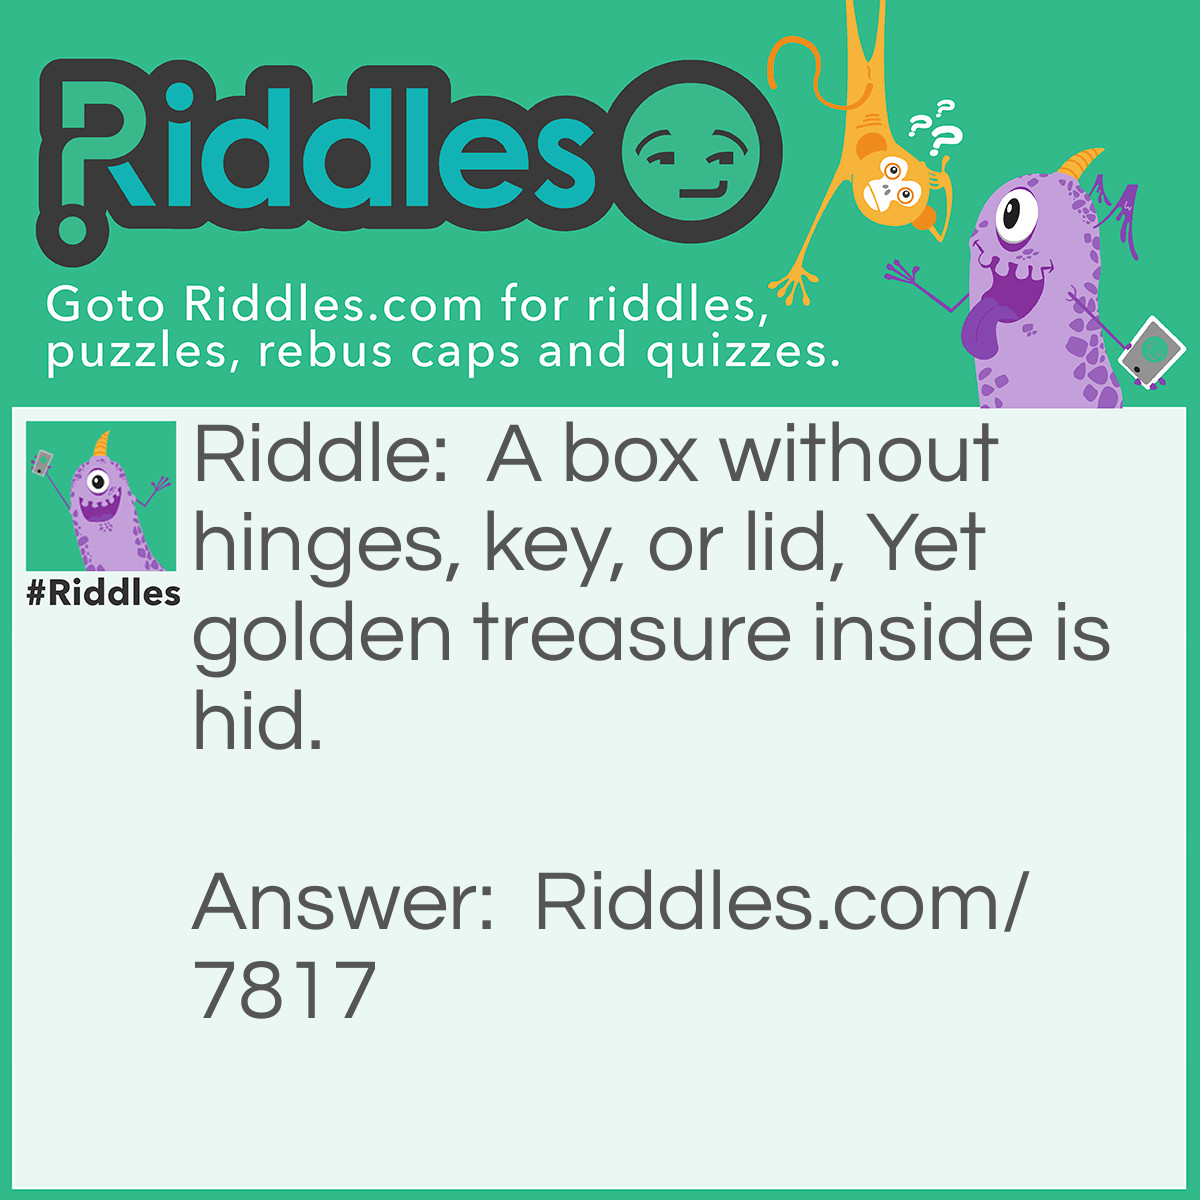 Riddle: A box without hinges, key, or lid, Yet golden treasure inside is hid. Answer: Egg.